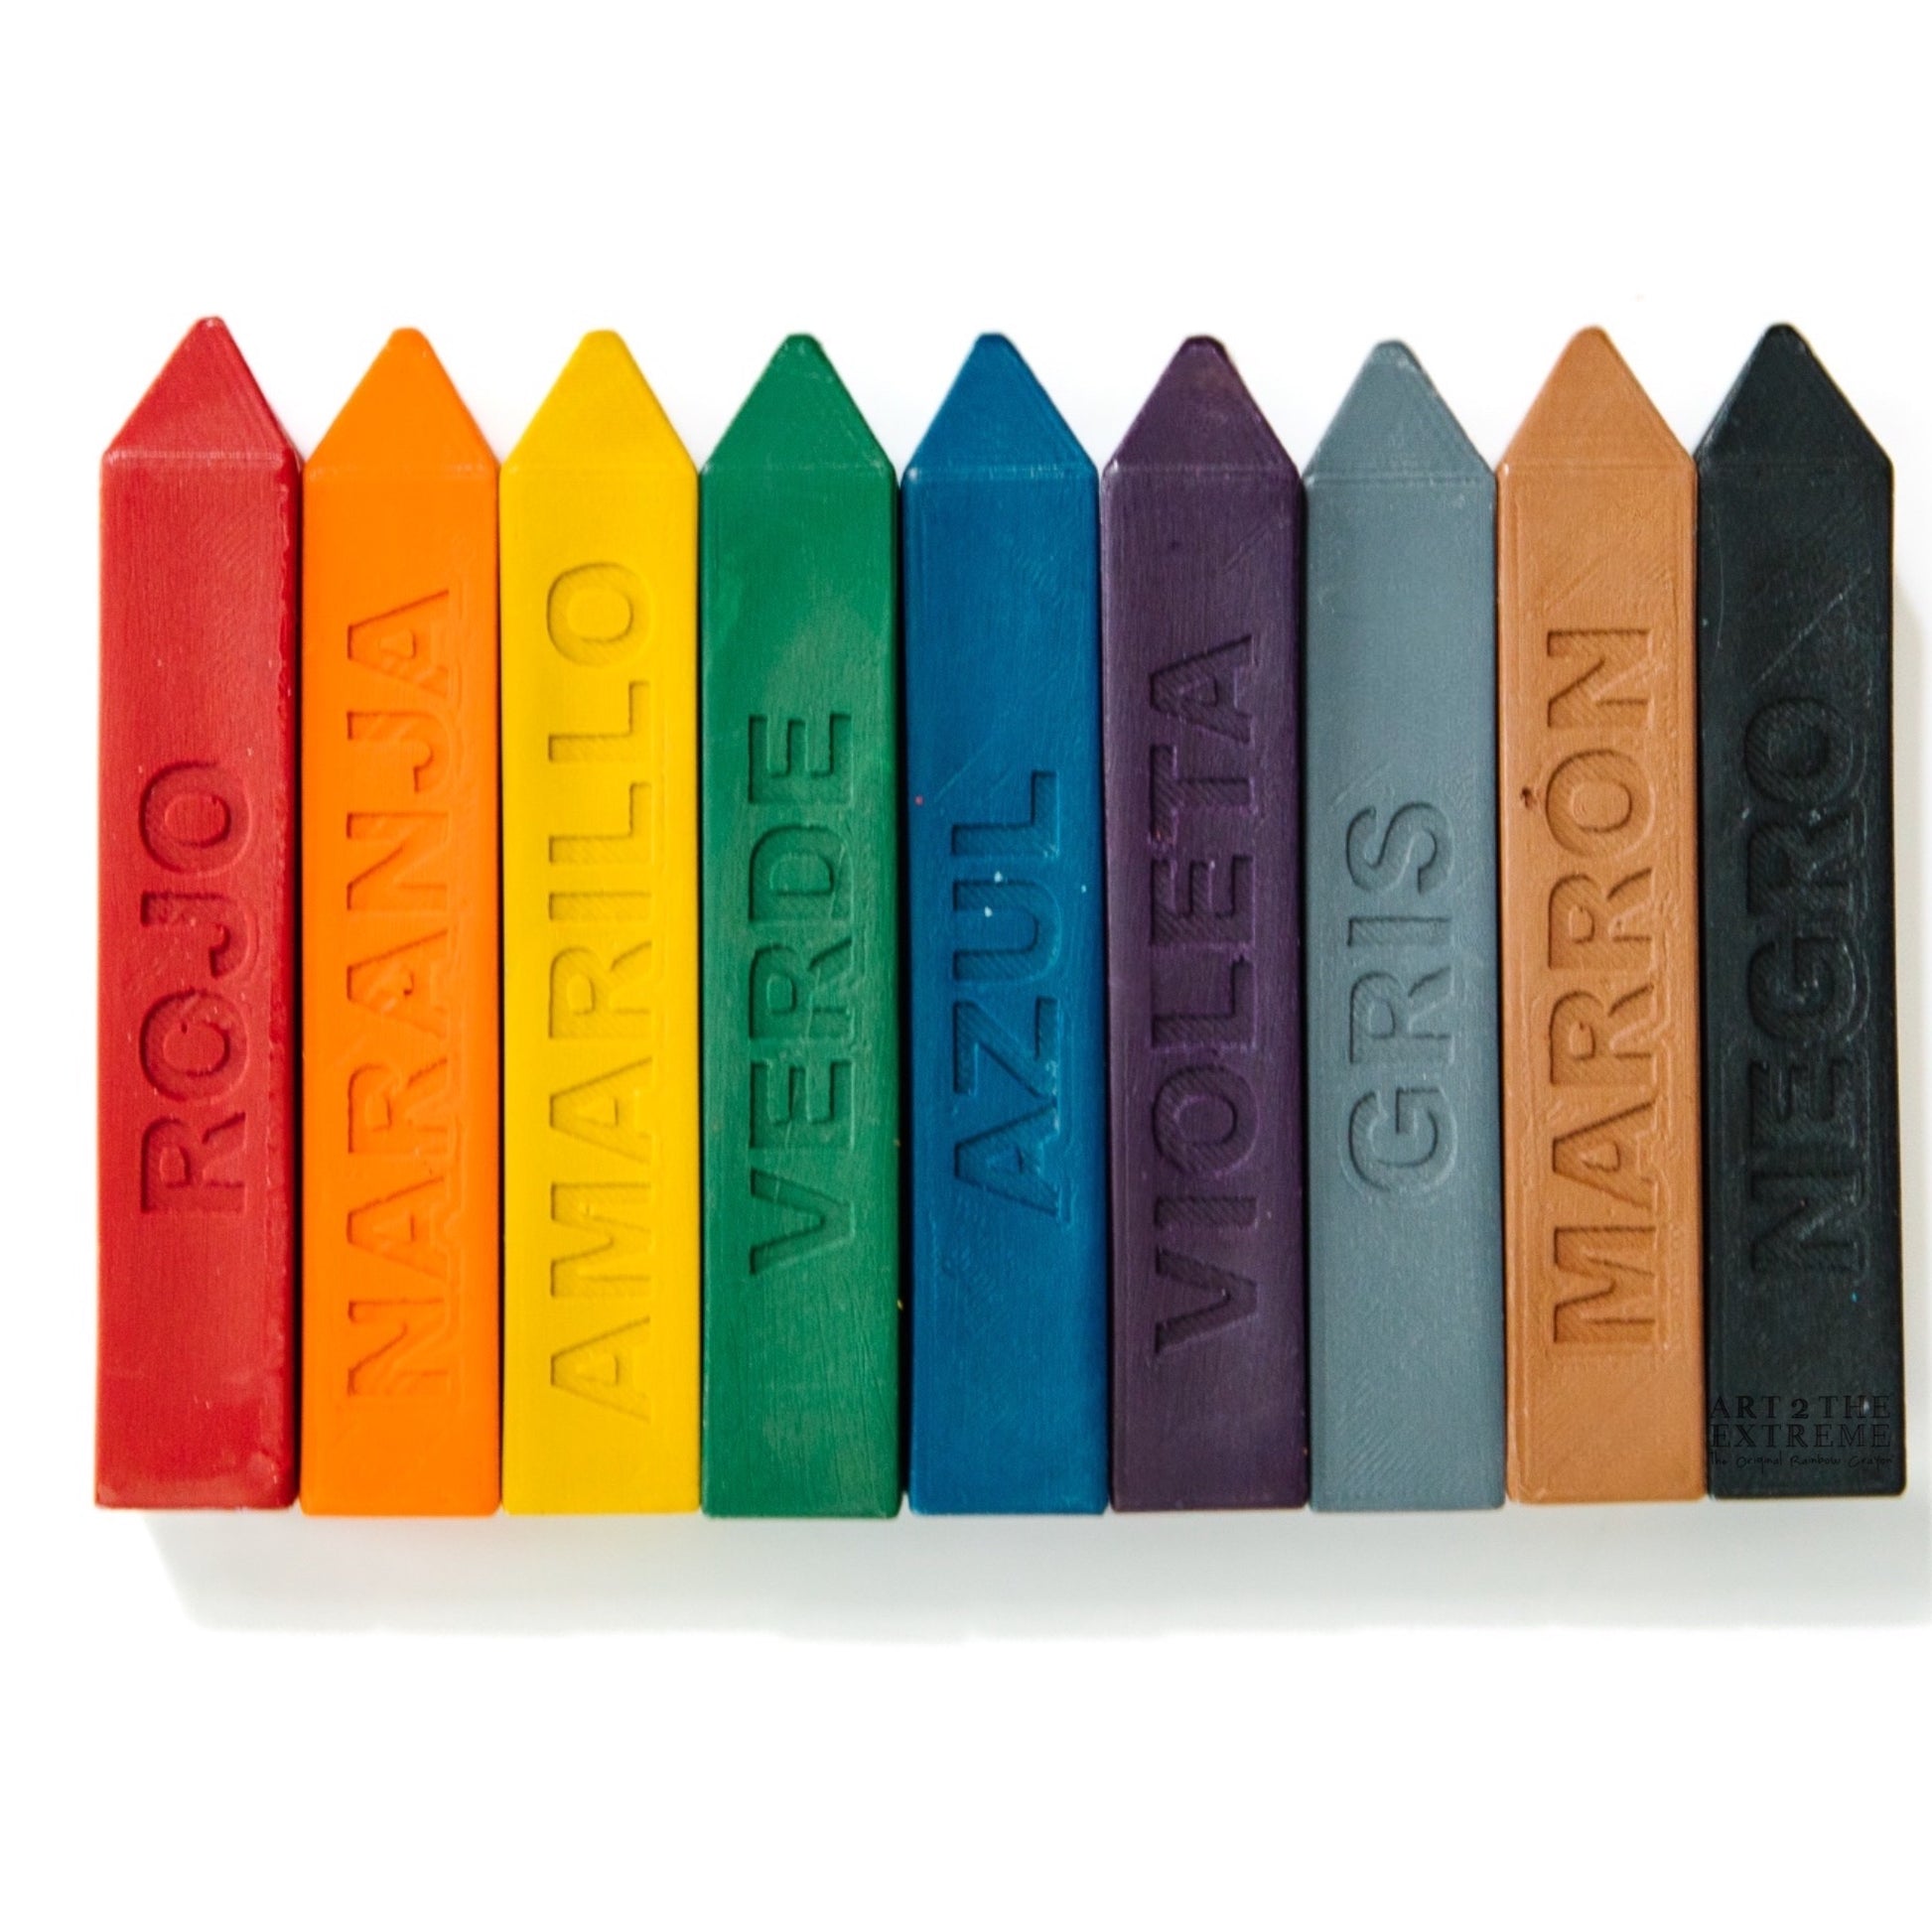 Spanish Crayon Stix  A fun way to learn colors in Spanish